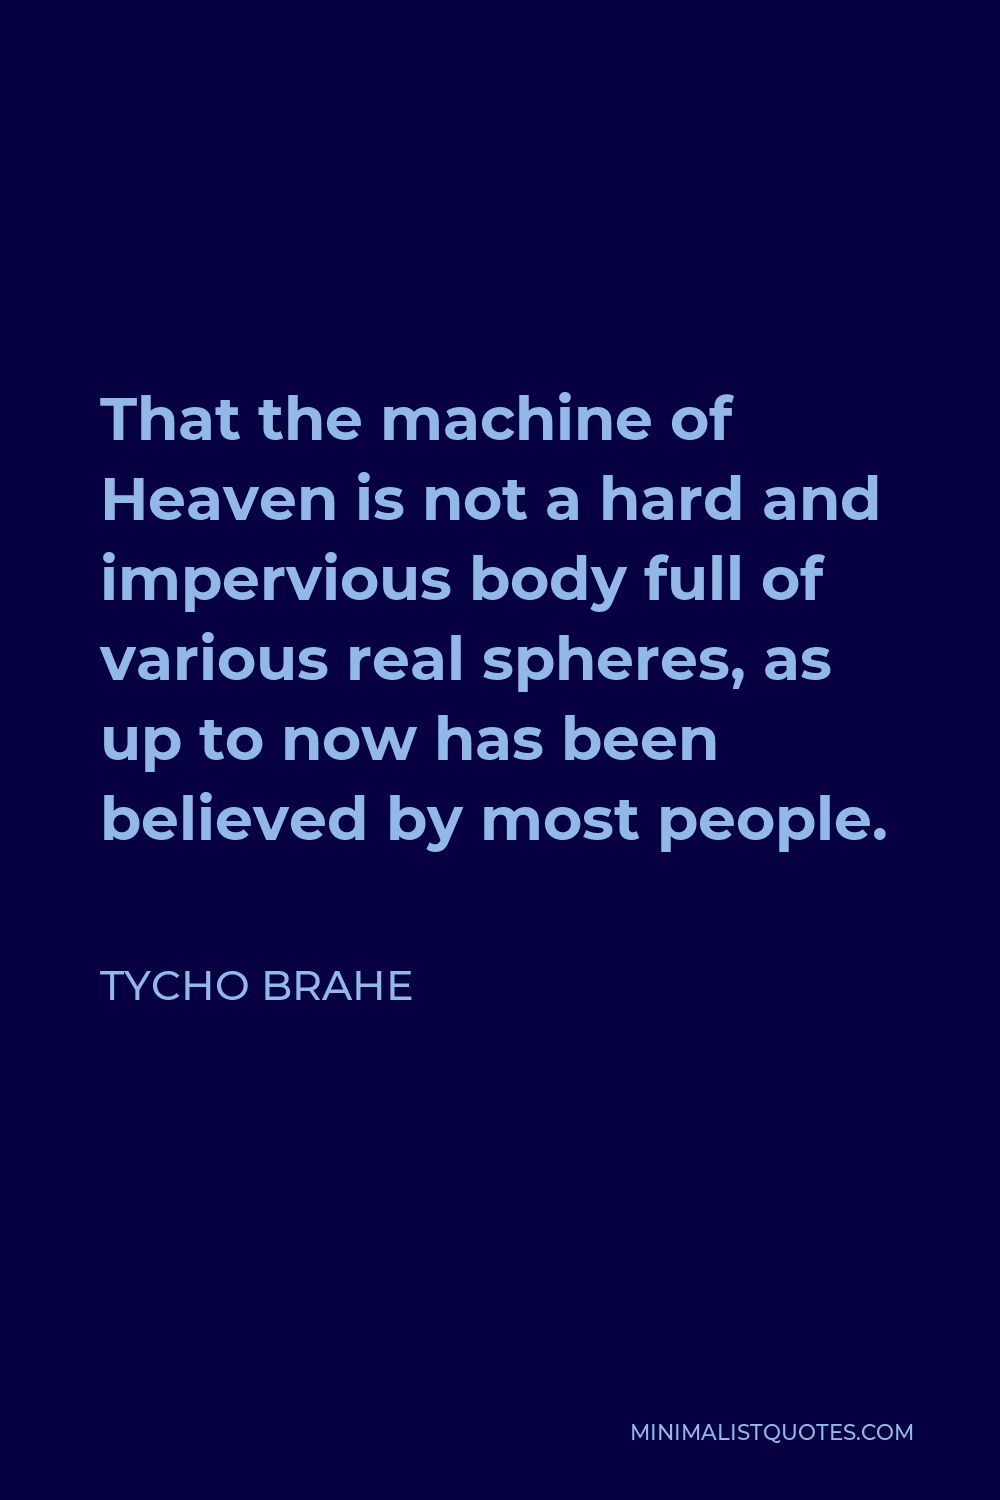 Tycho Brahe Quote - That the machine of Heaven is not a hard and impervious body full of various real spheres, as up to now has been believed by most people.